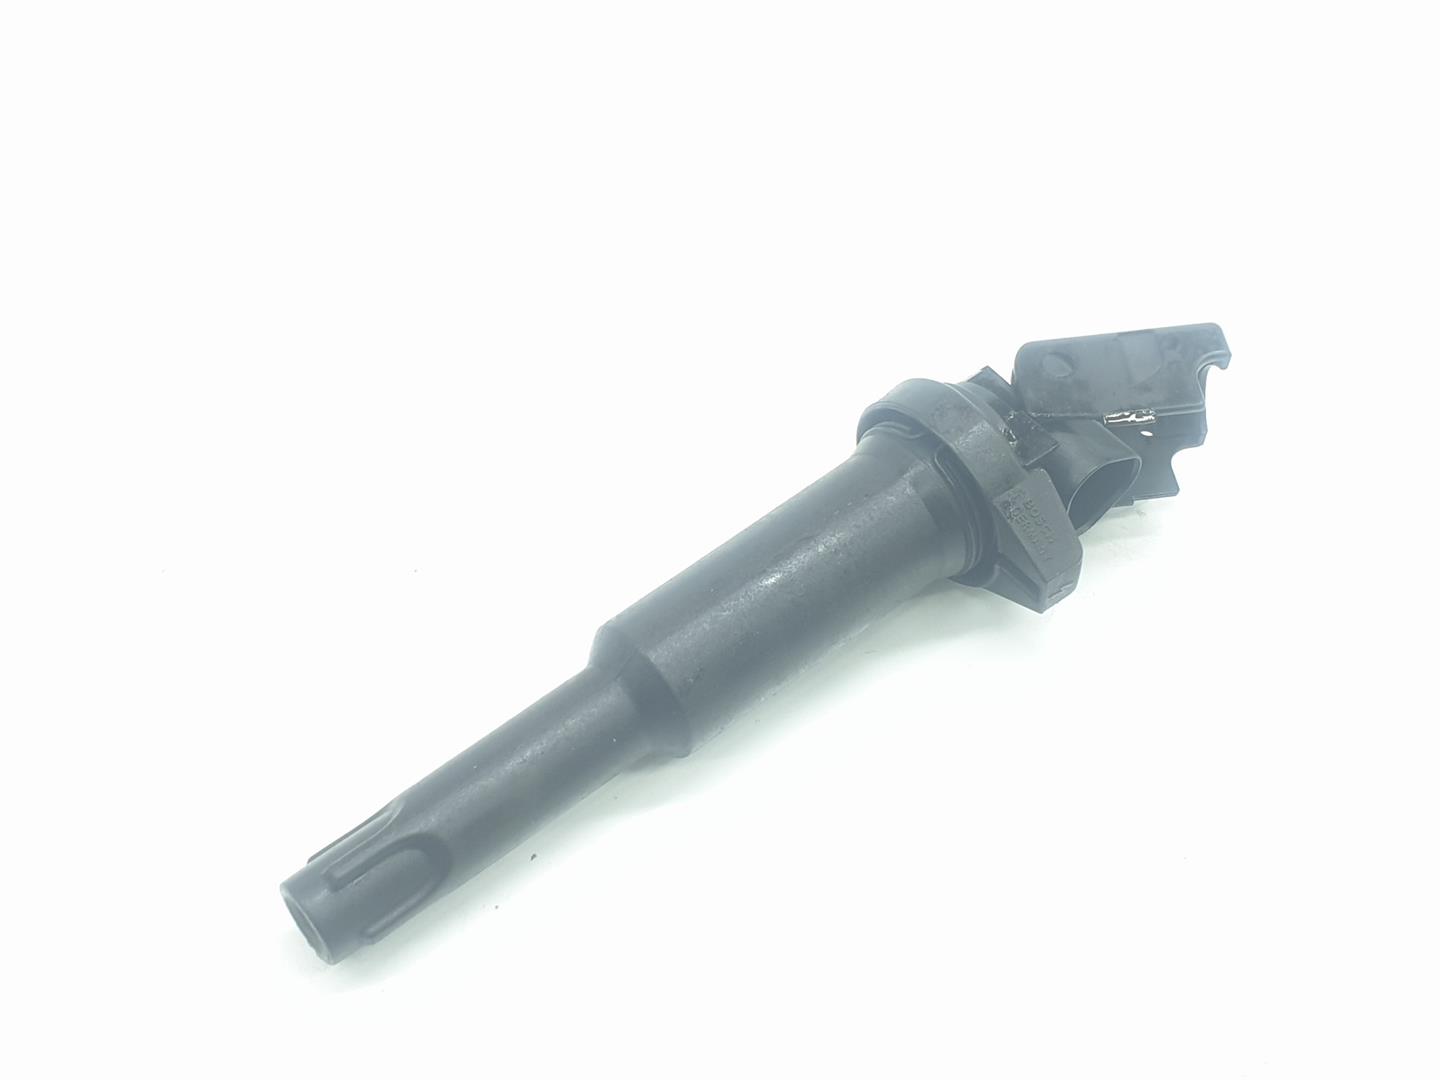 BMW 6 Series E63/E64 (2003-2010) High Voltage Ignition Coil 7548553, 7548553, 1111AA 24700156